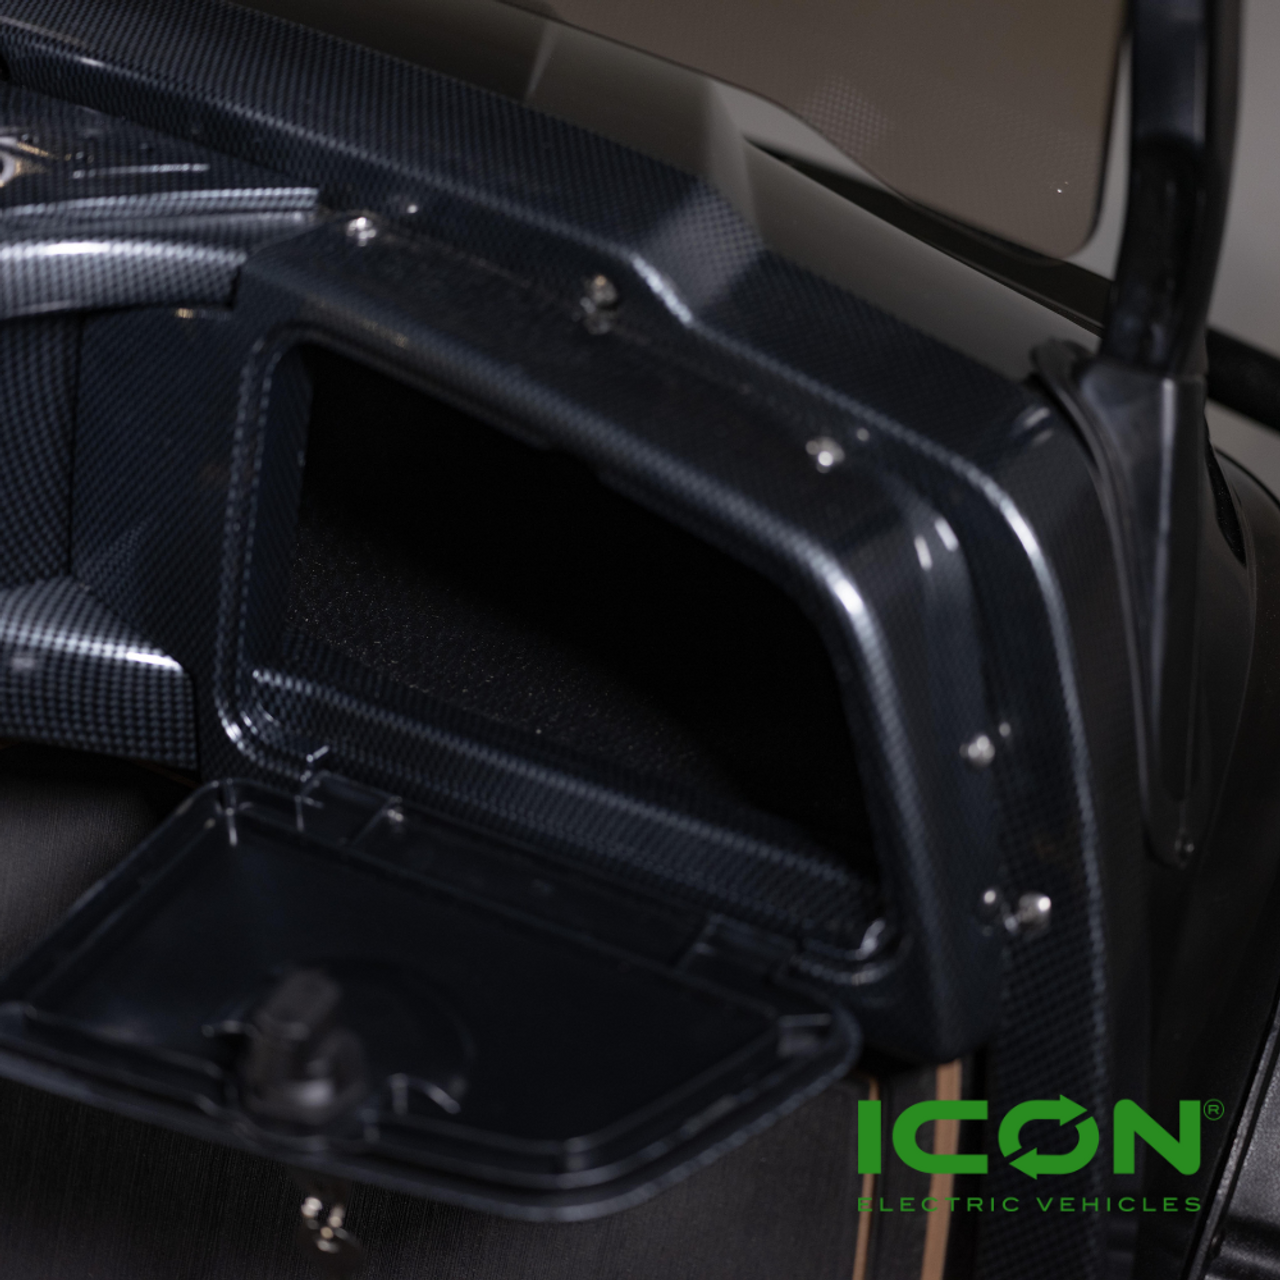 Carbon-Fiber Dashboard Assembly for ICON Golf Carts (2020 and Newer i20, i20U, i20L, i40, i40F, i40L, i60, i60F, i60L, i80), DSH-702-IC, 2.08.001.000055